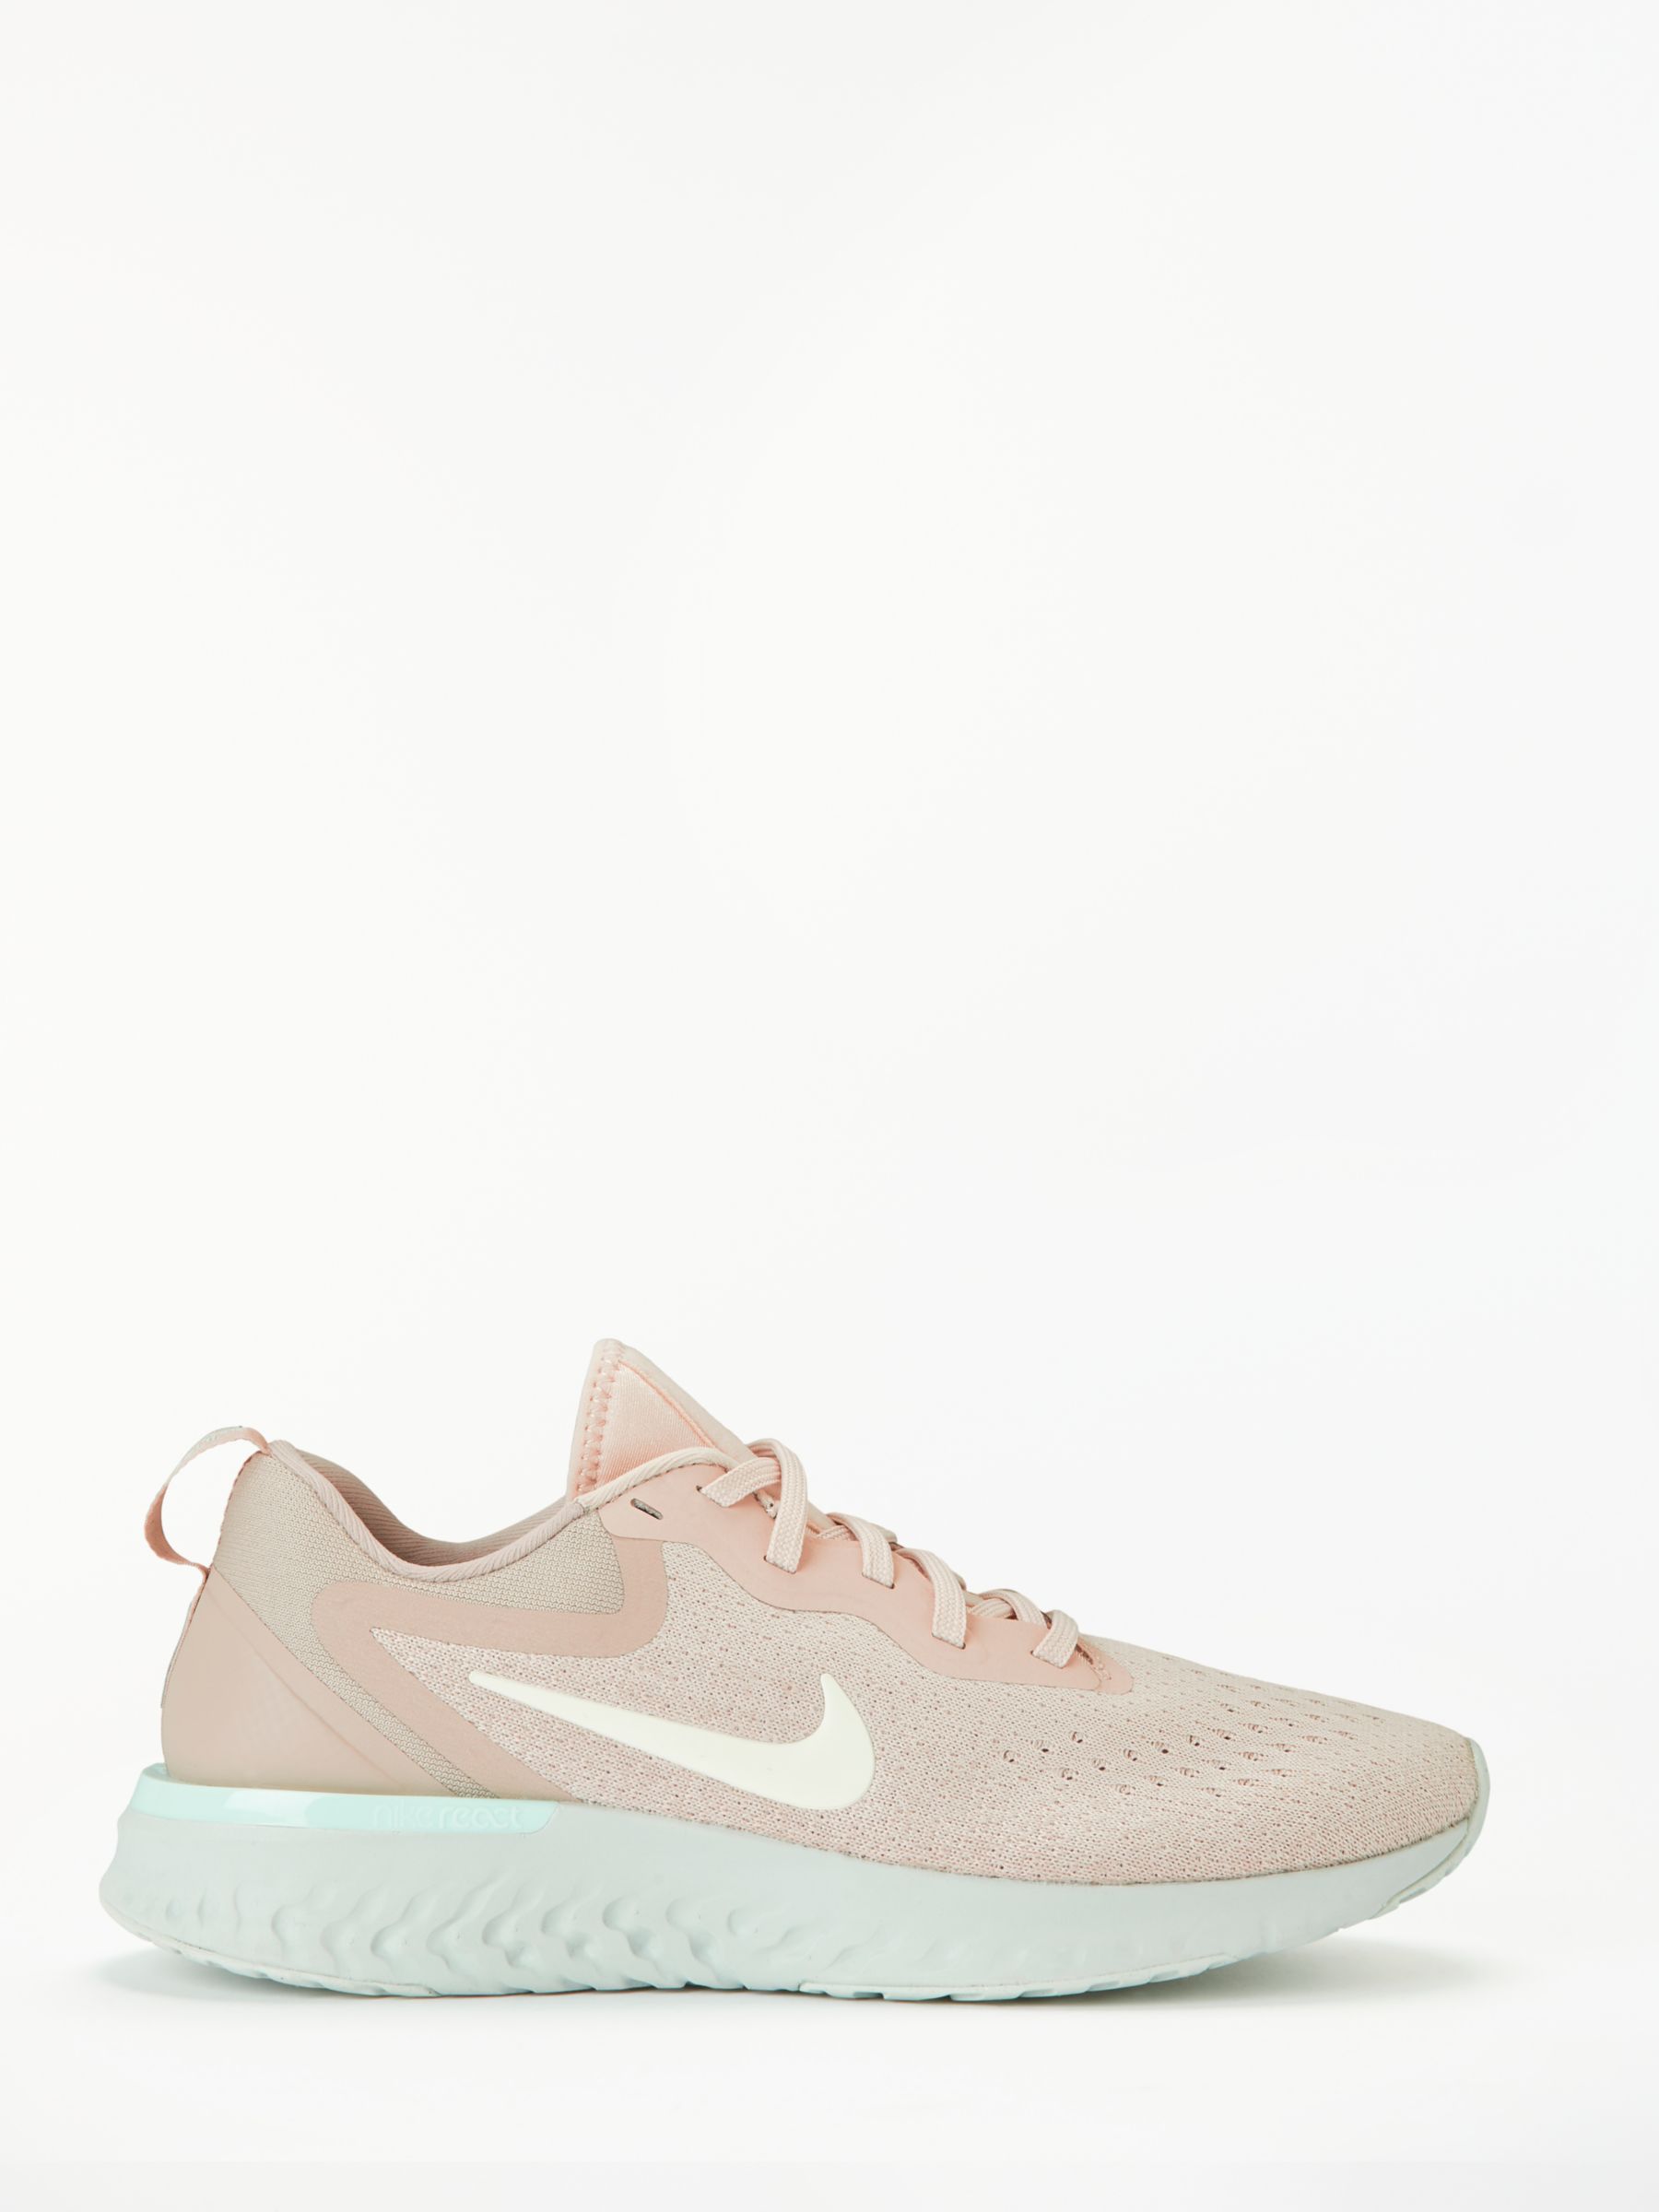 taupe nike shoes